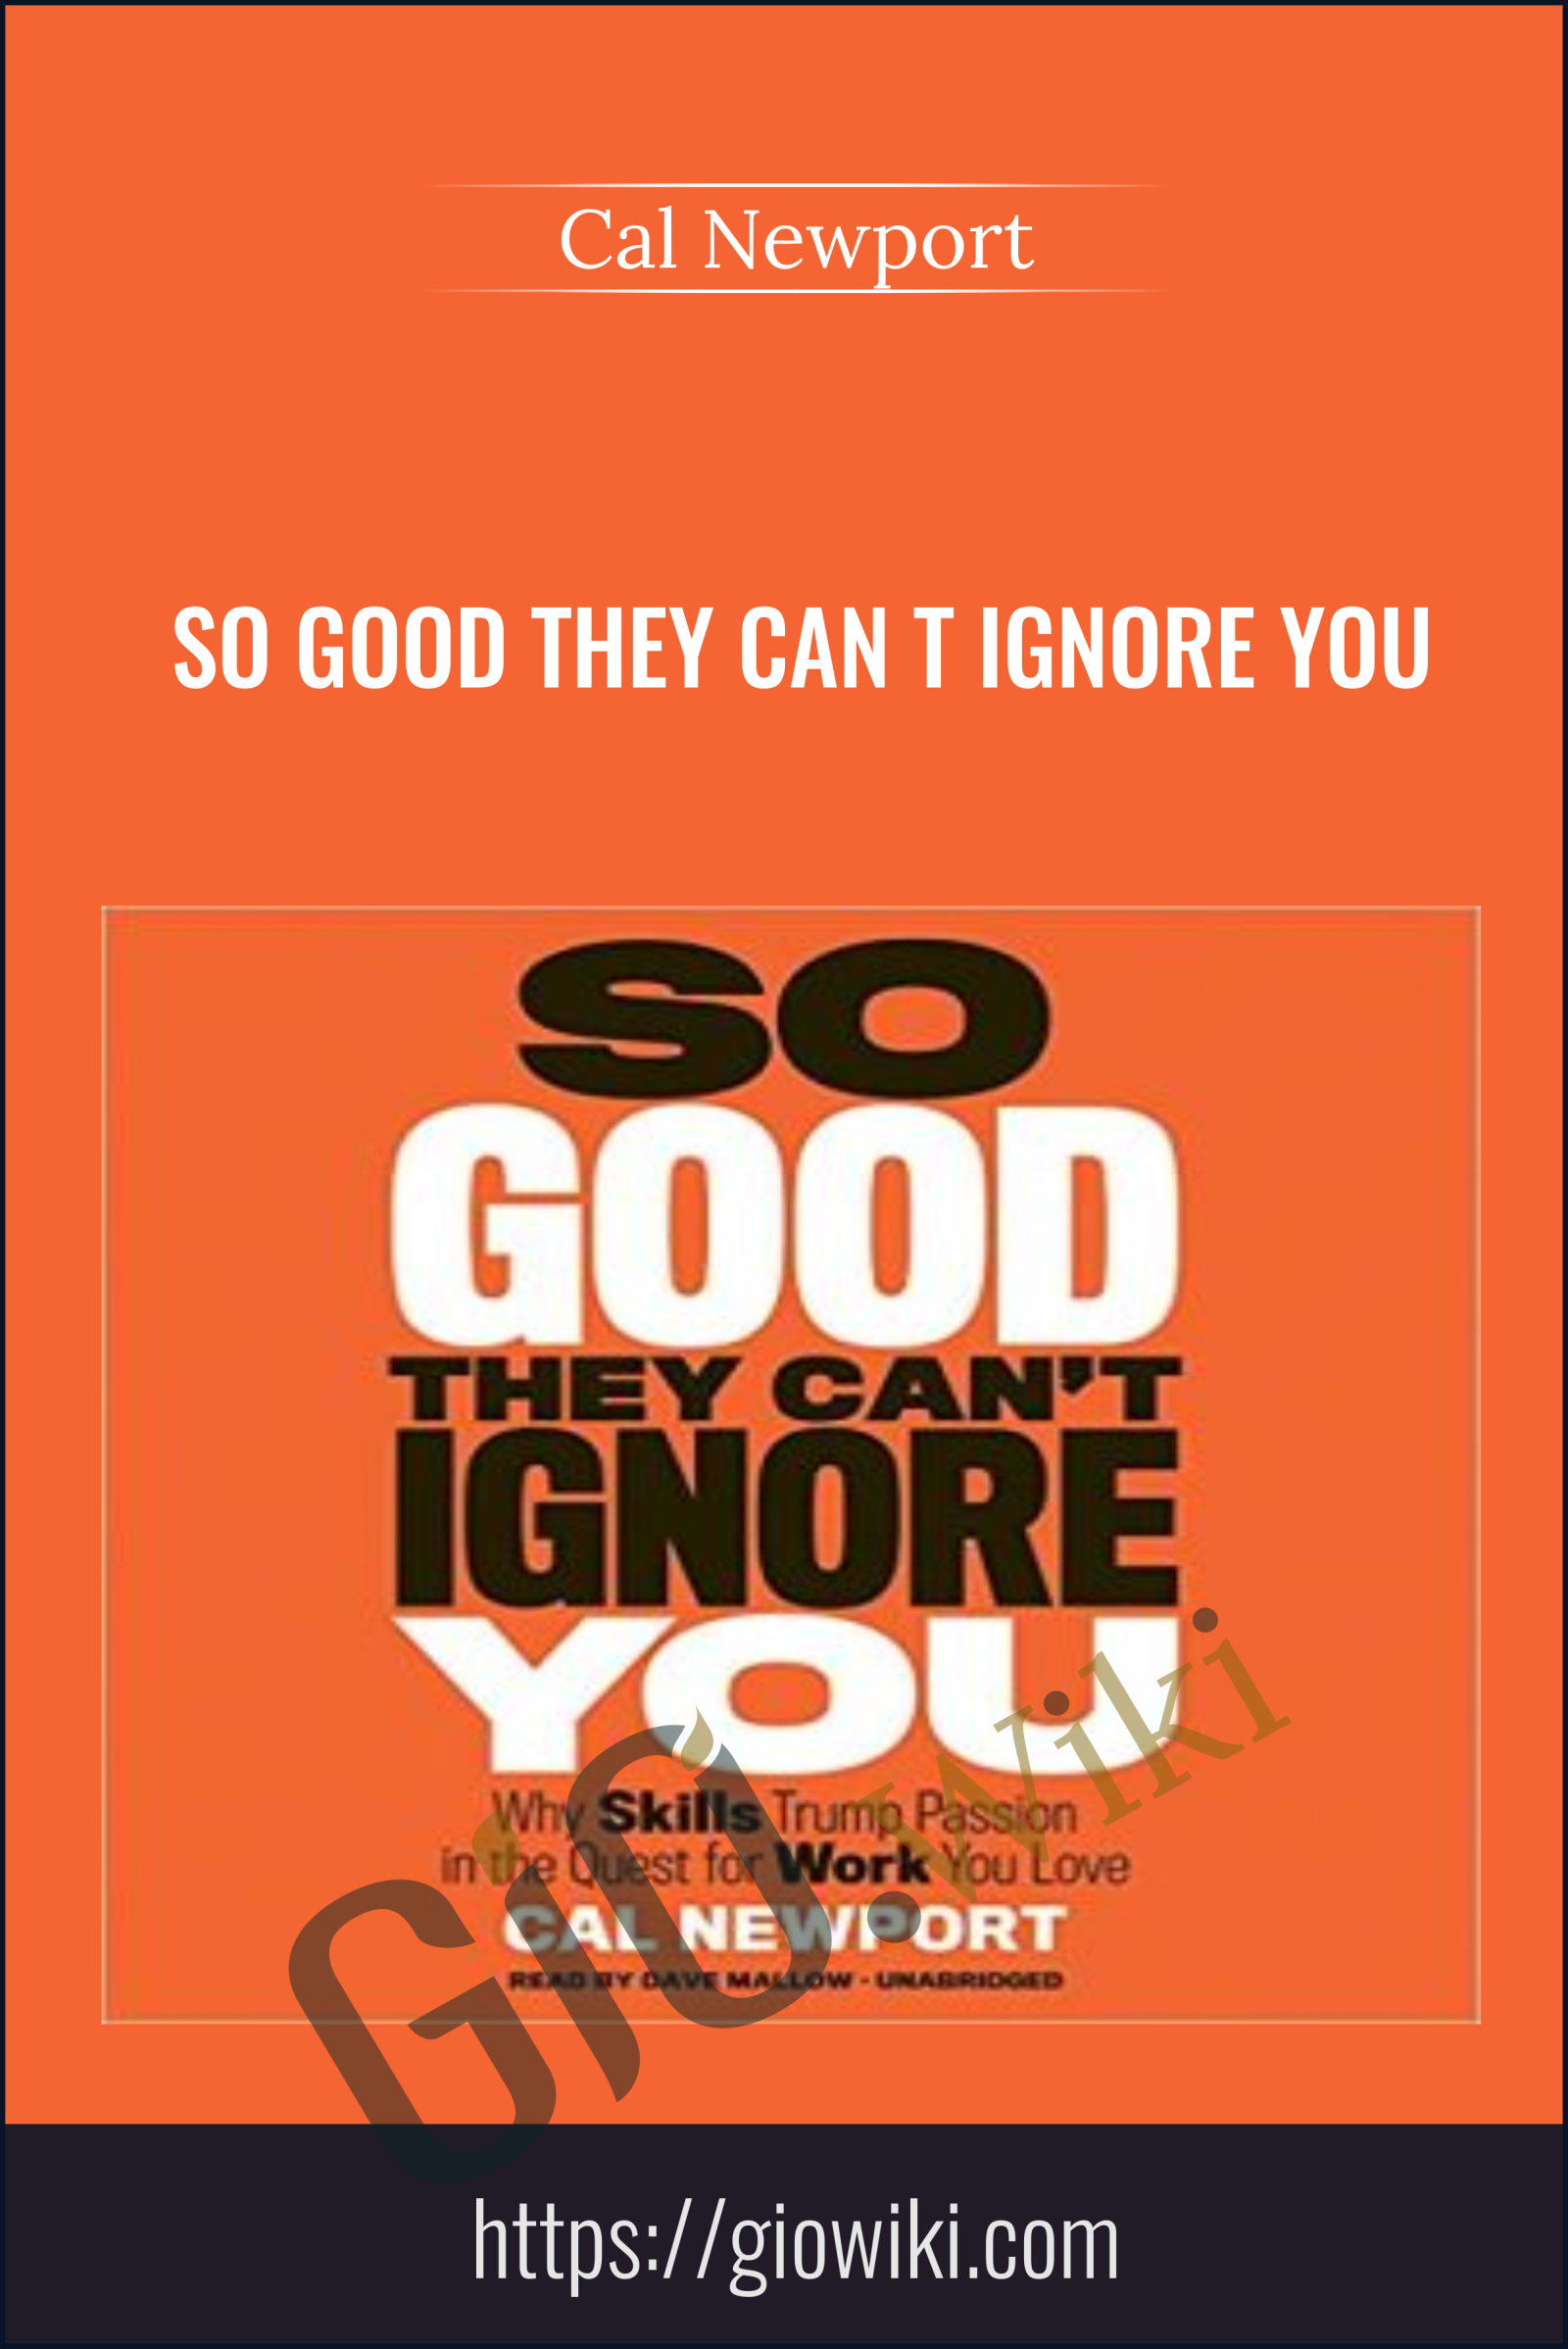 So Good They Can t Ignore You - Cal Newport